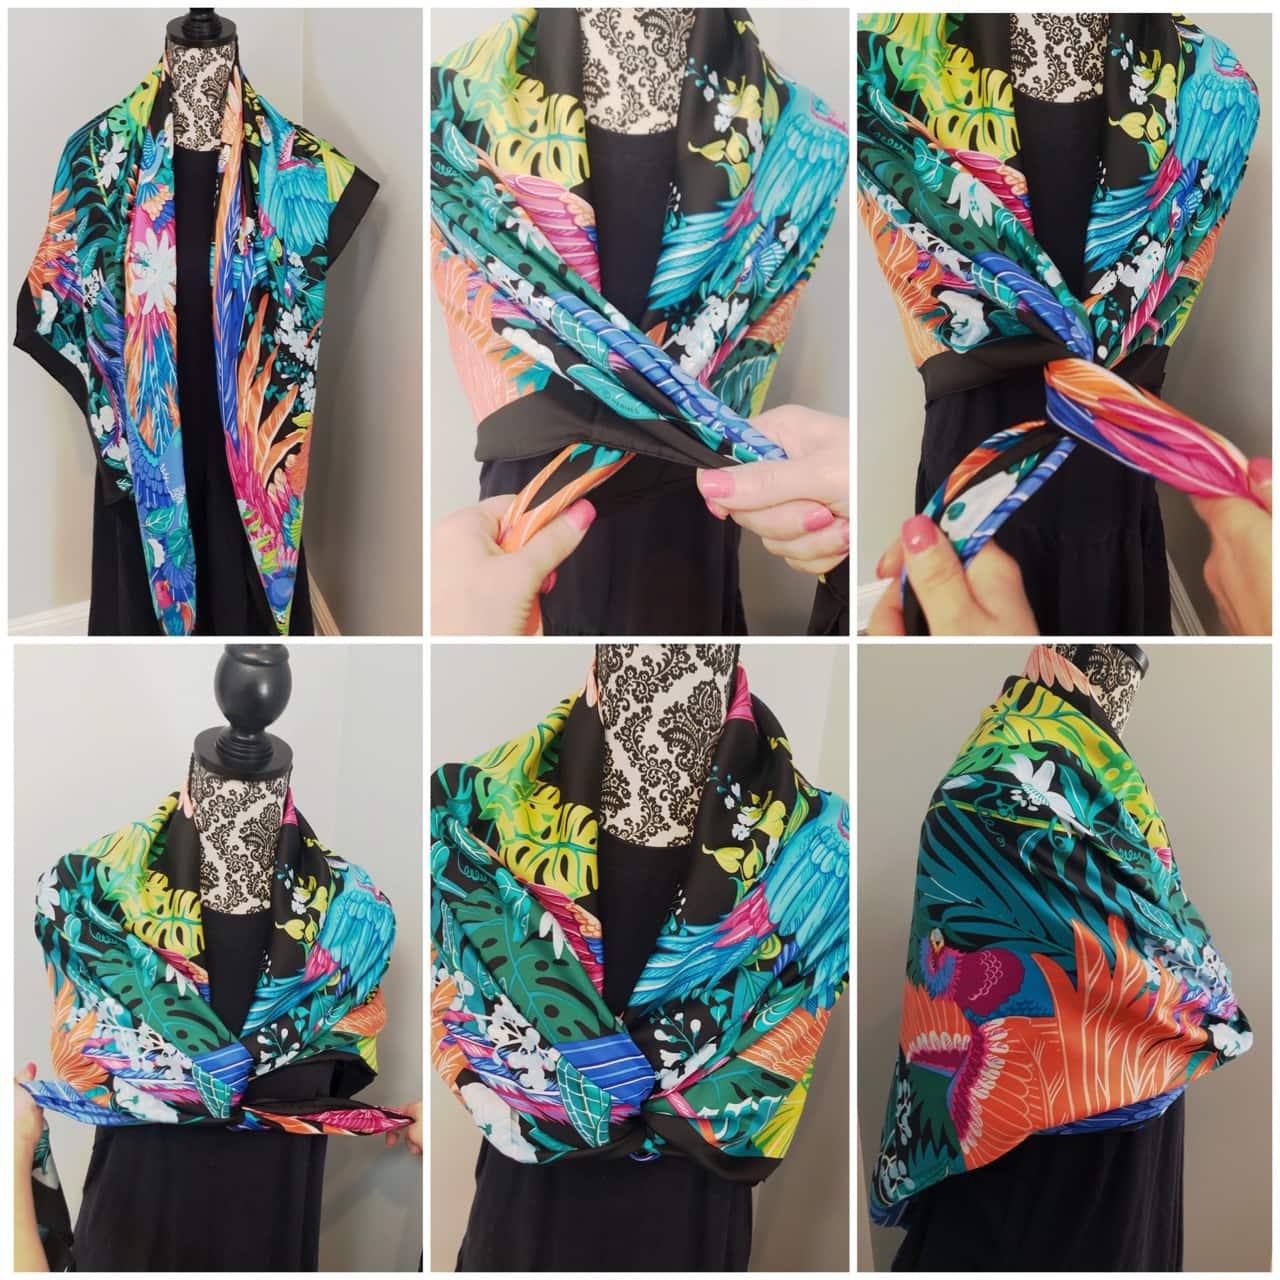 How to Tie a Hermes Scarf 4 ways - Later Ever After, BlogLater